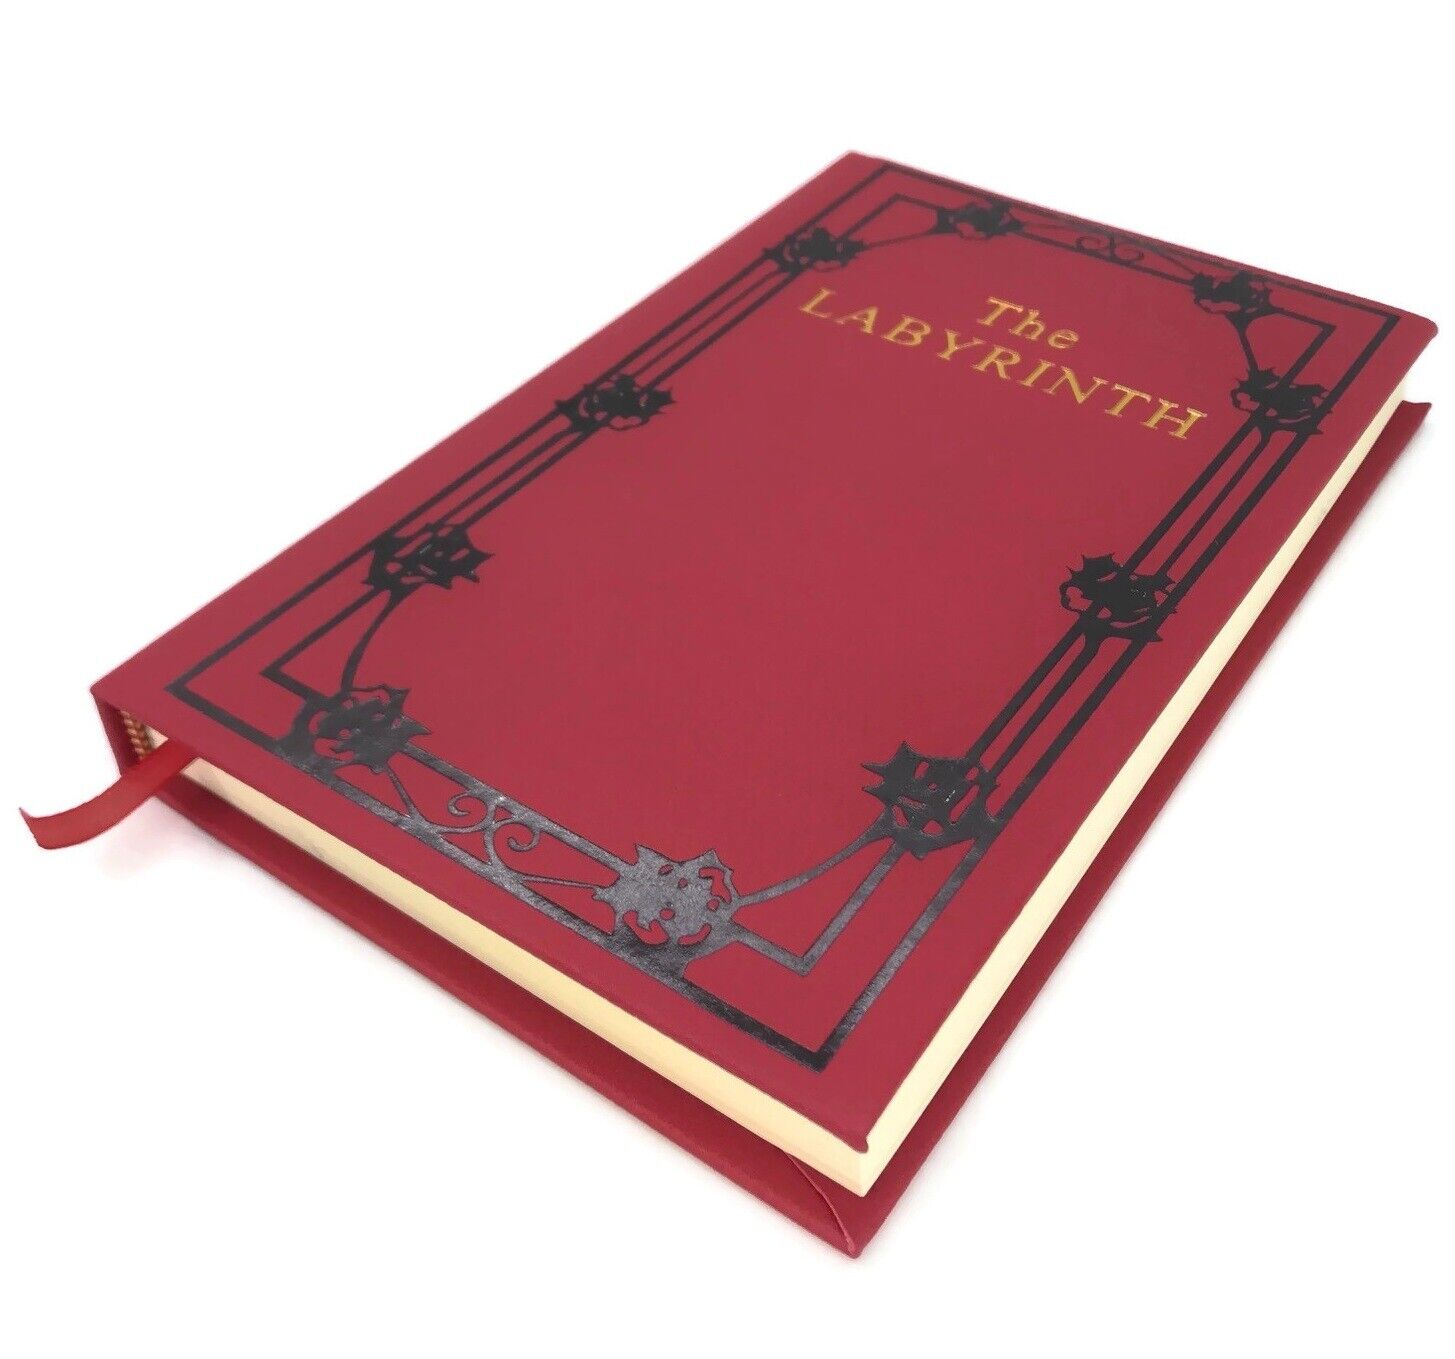 The LABYRINTH RED BOOK Sarah's Replica